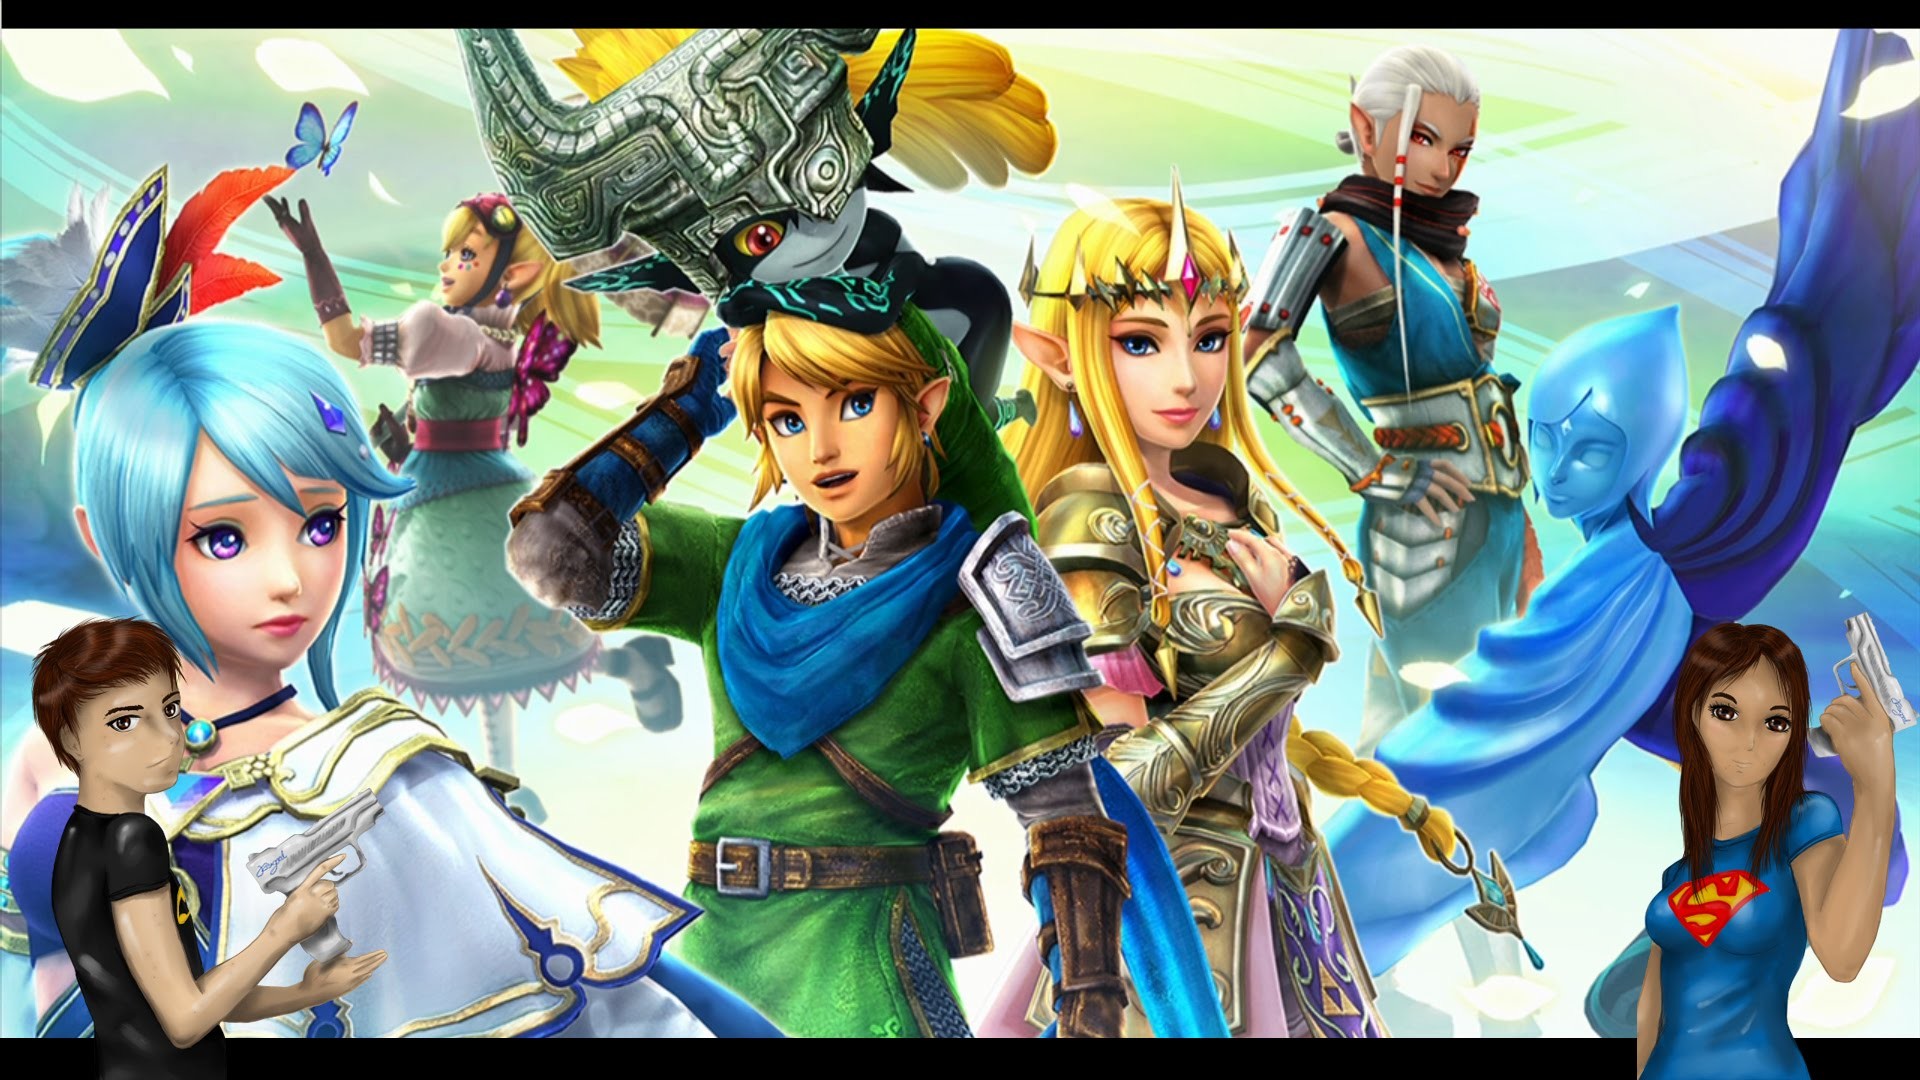 1920x1080 Hyrule Warriors: Be inspired by the illustration "True Partners"! - YouTube